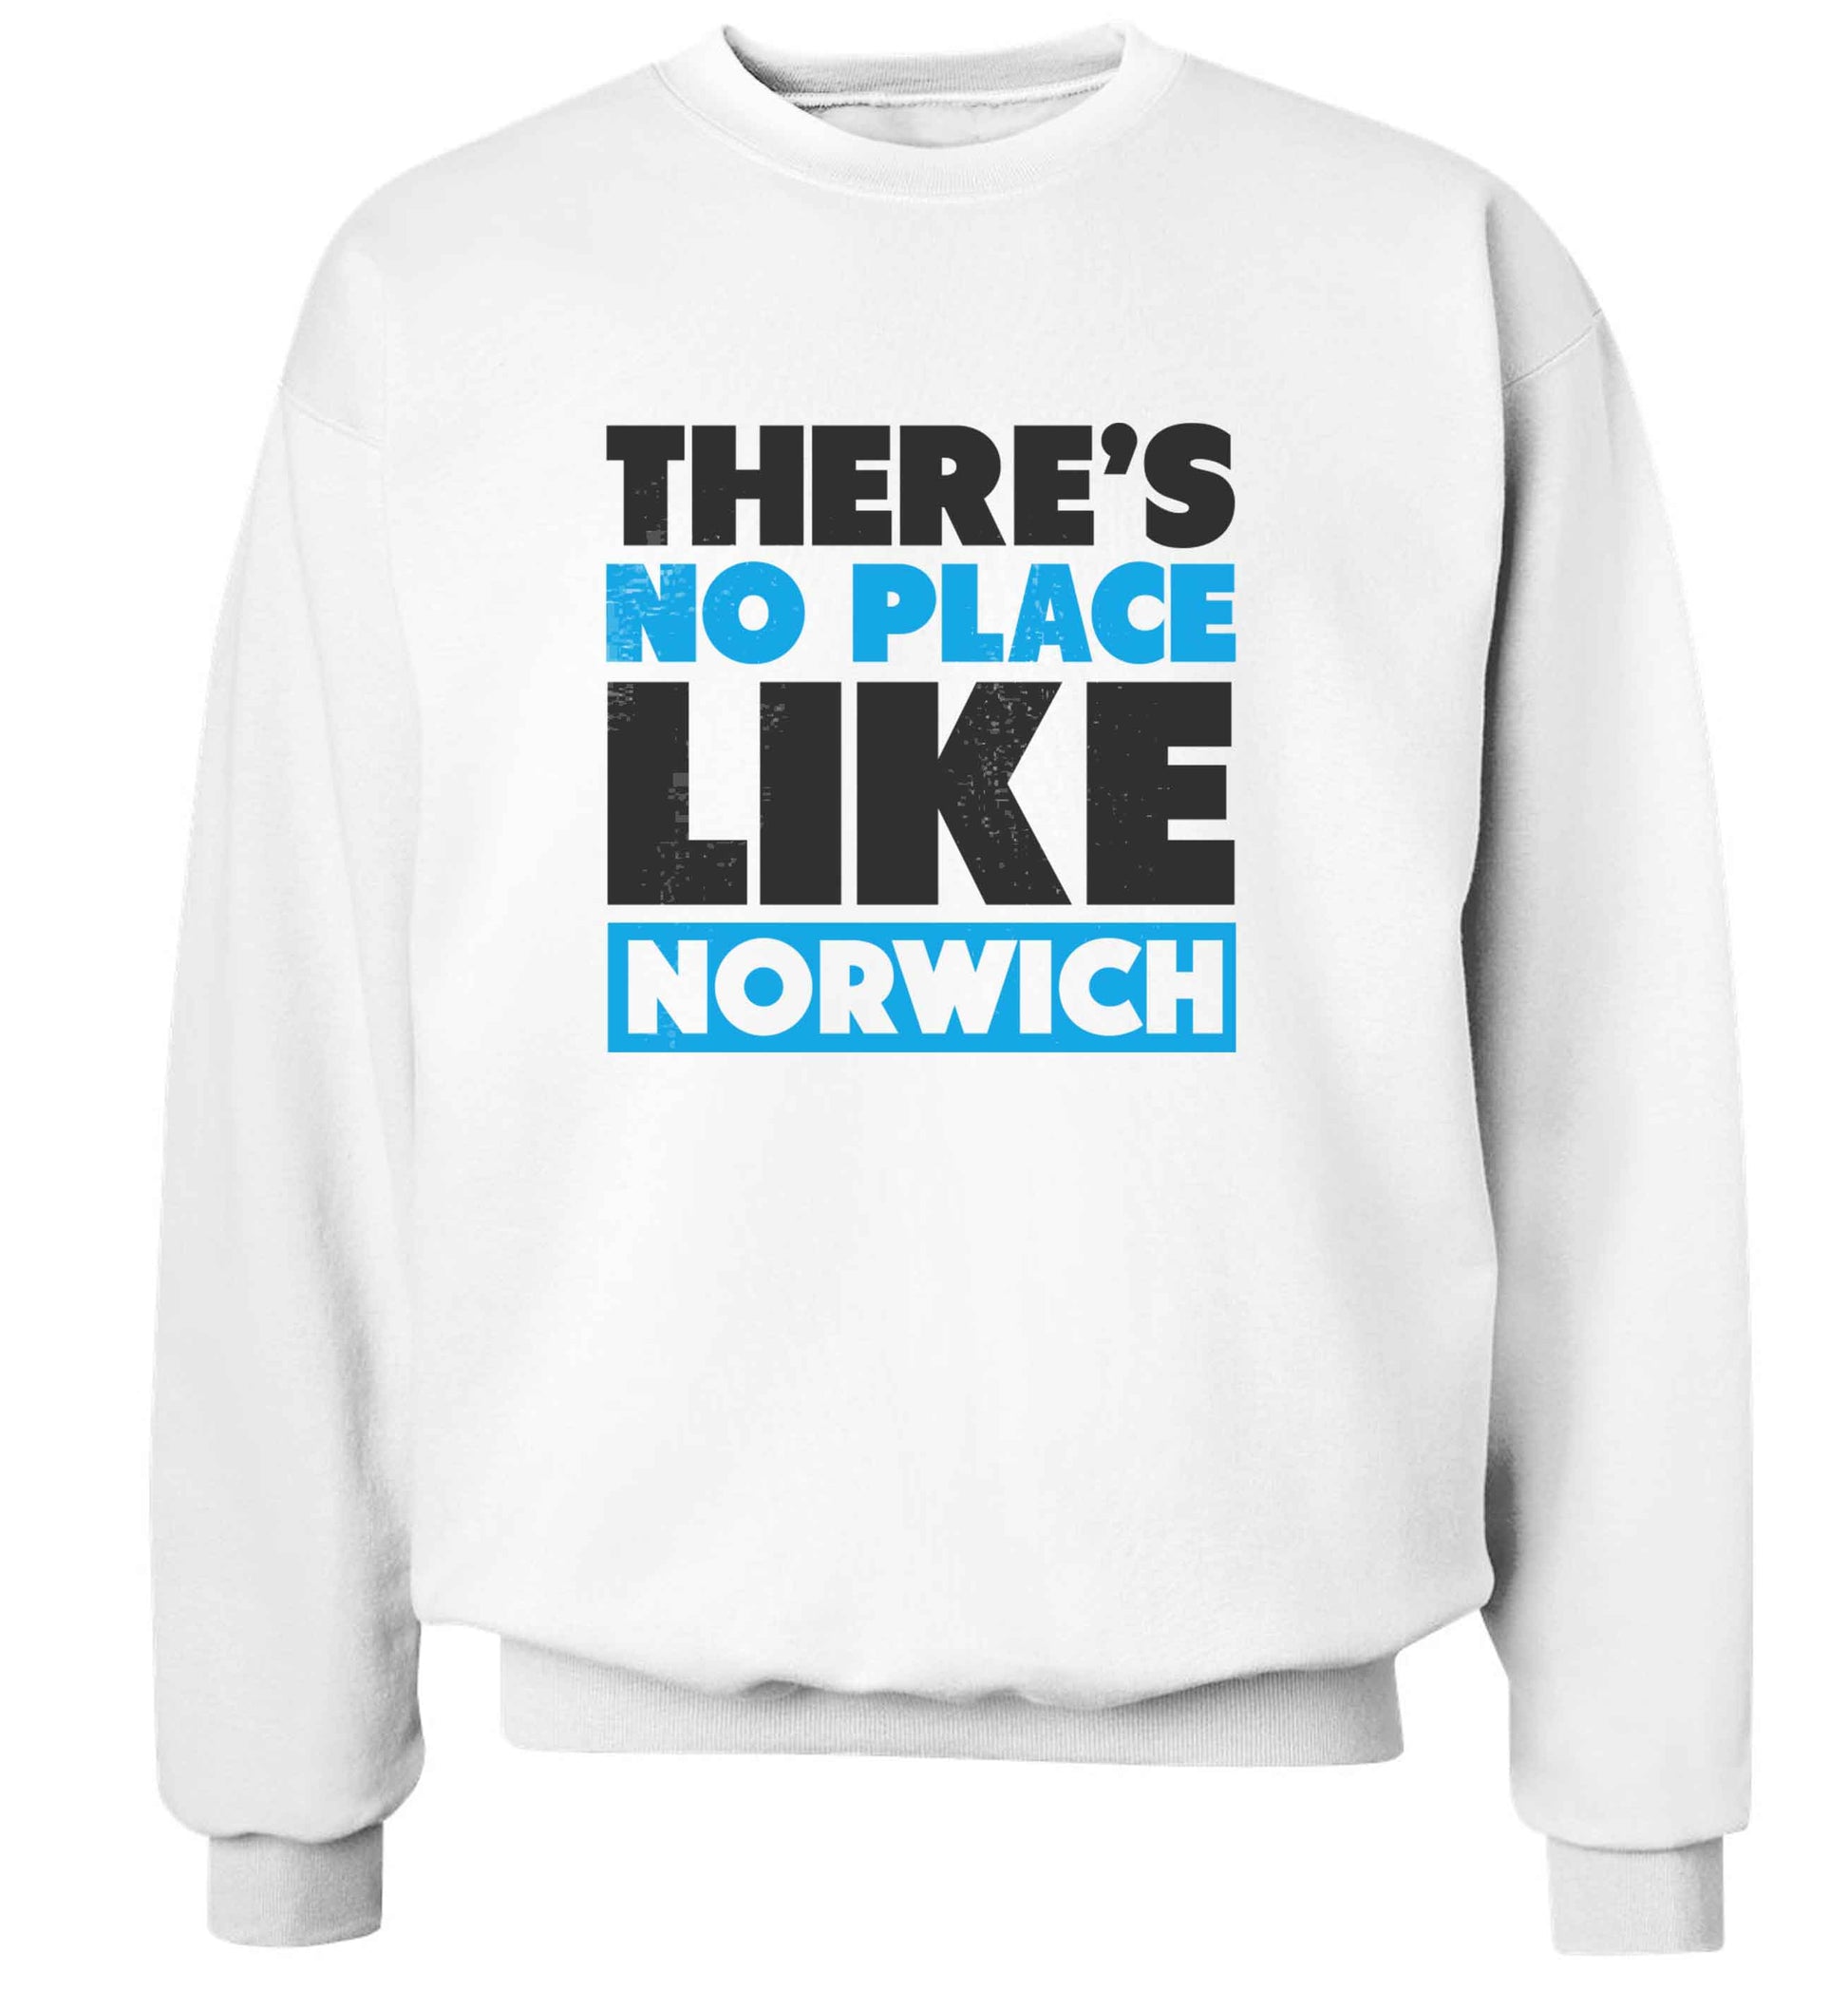 There's no place like Norwich adult's unisex white sweater 2XL